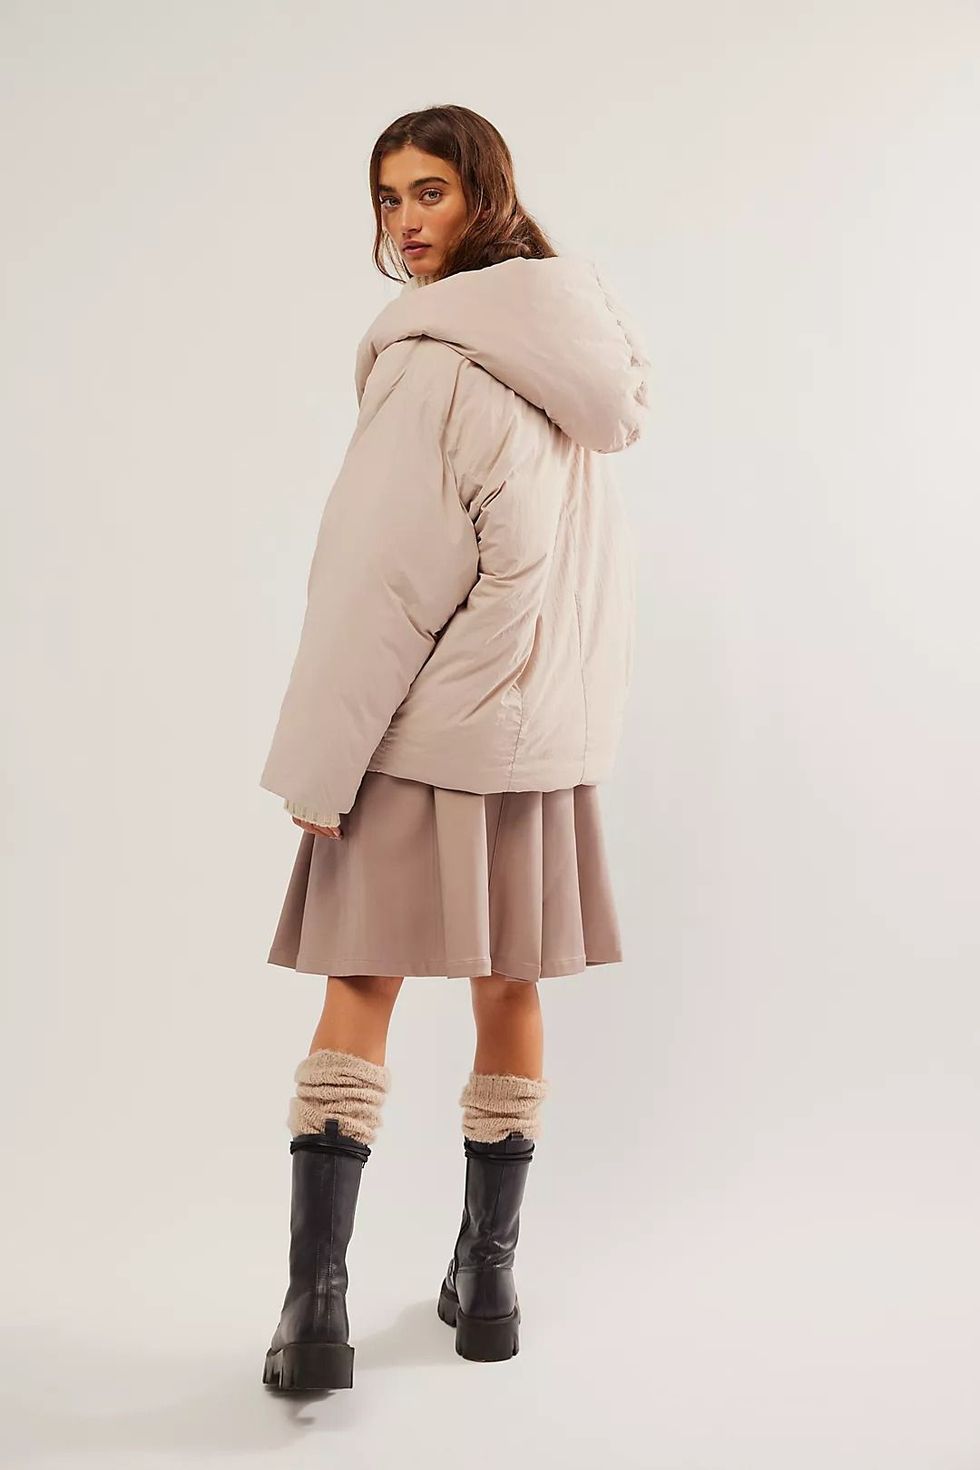 Arket's Puffer Coats Are Back in Stock and Trending Again